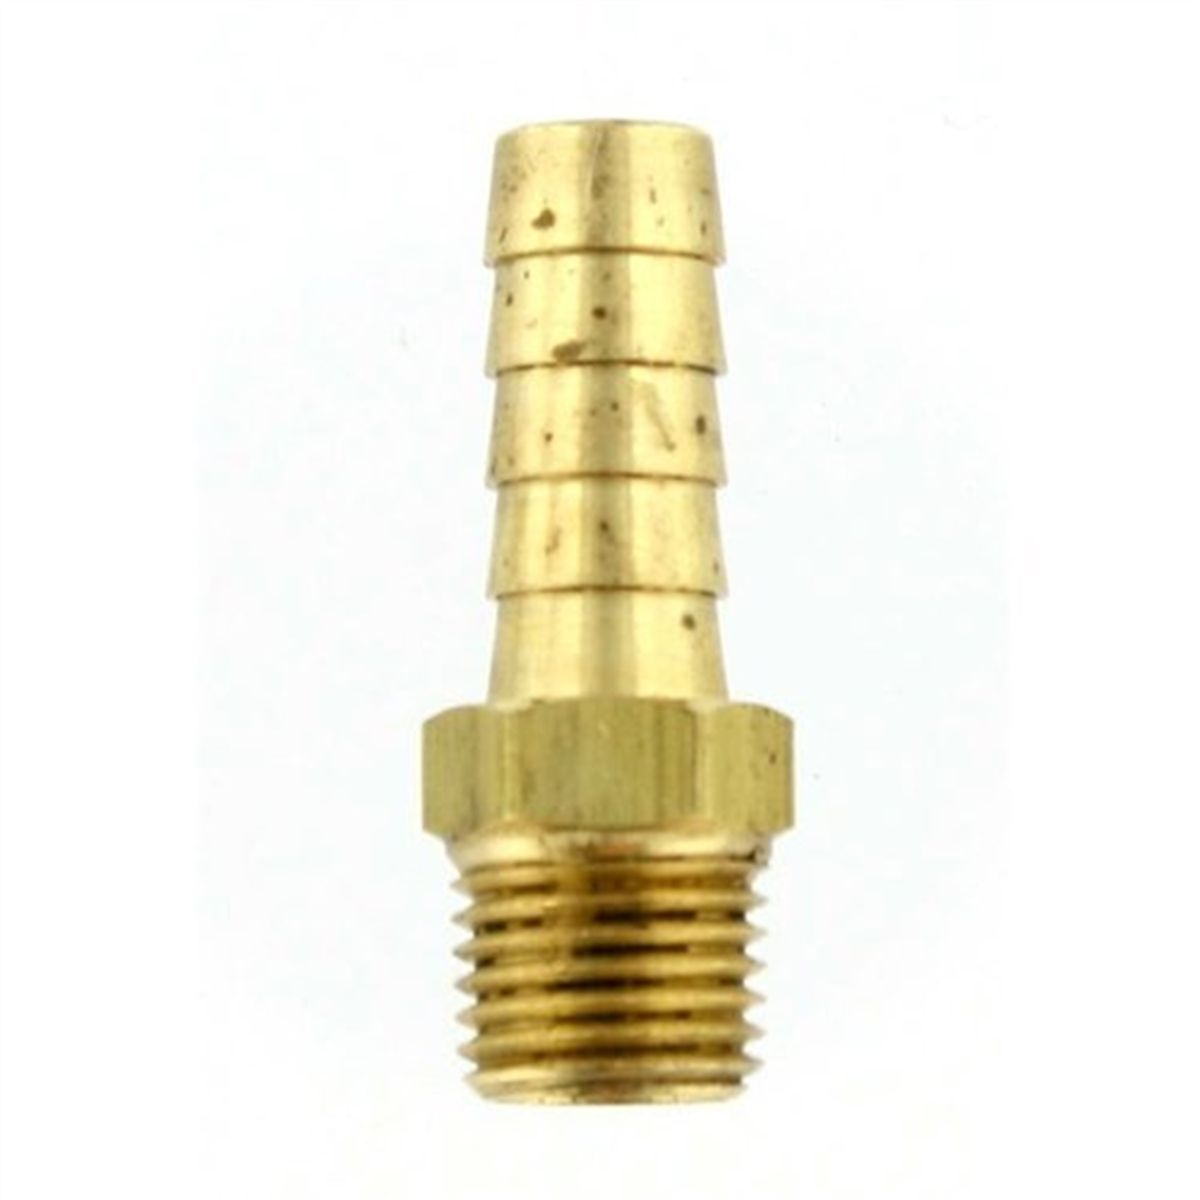 Solid Brass Male Hose Barb Fitting - 1/4 In NPT - 3/8 In Hose ID